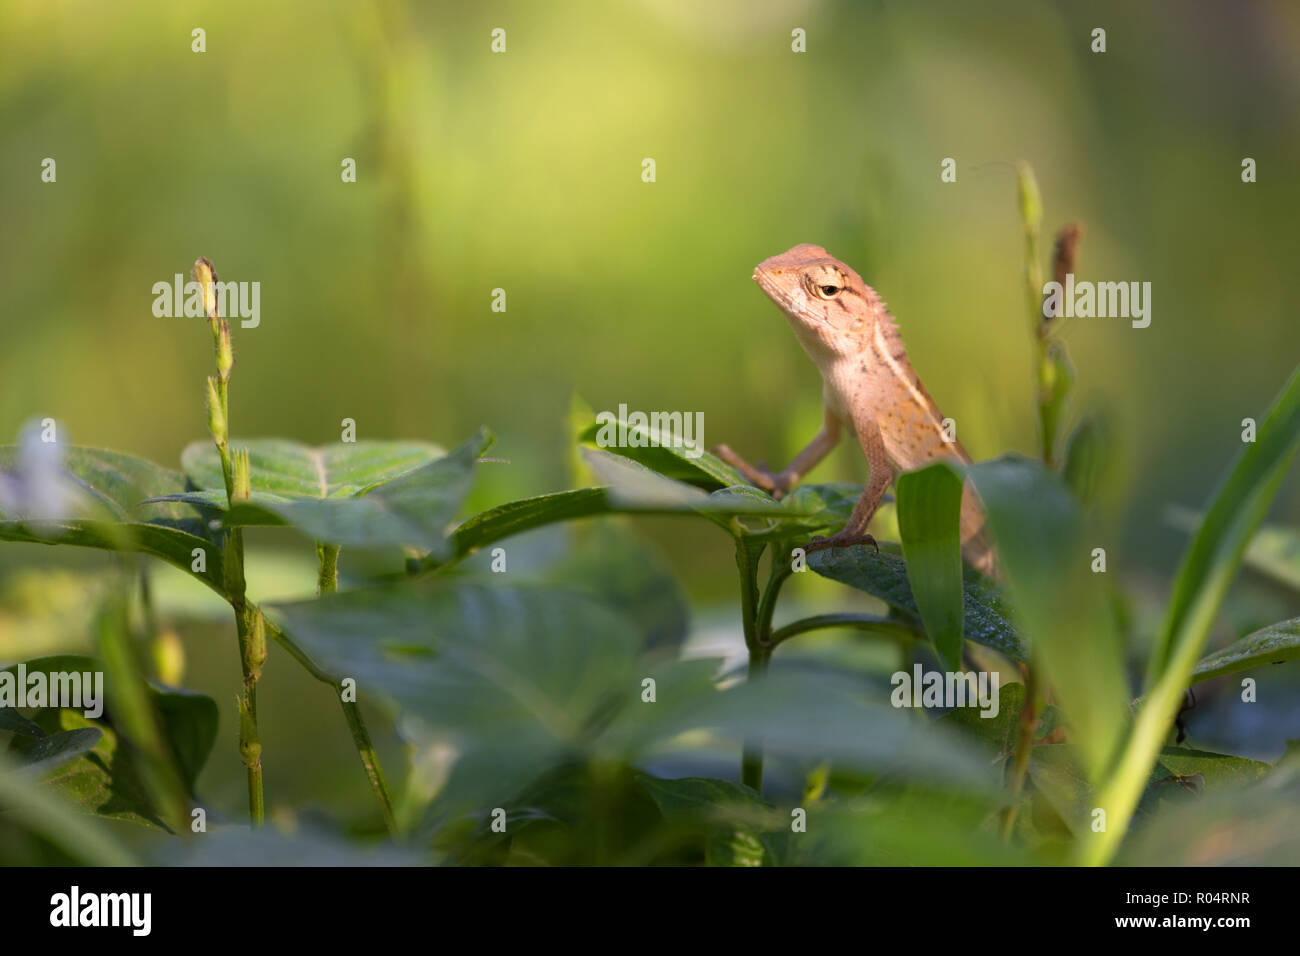 Changeable lizard on leaf, shallow depth of field, focus on the head Stock Photo